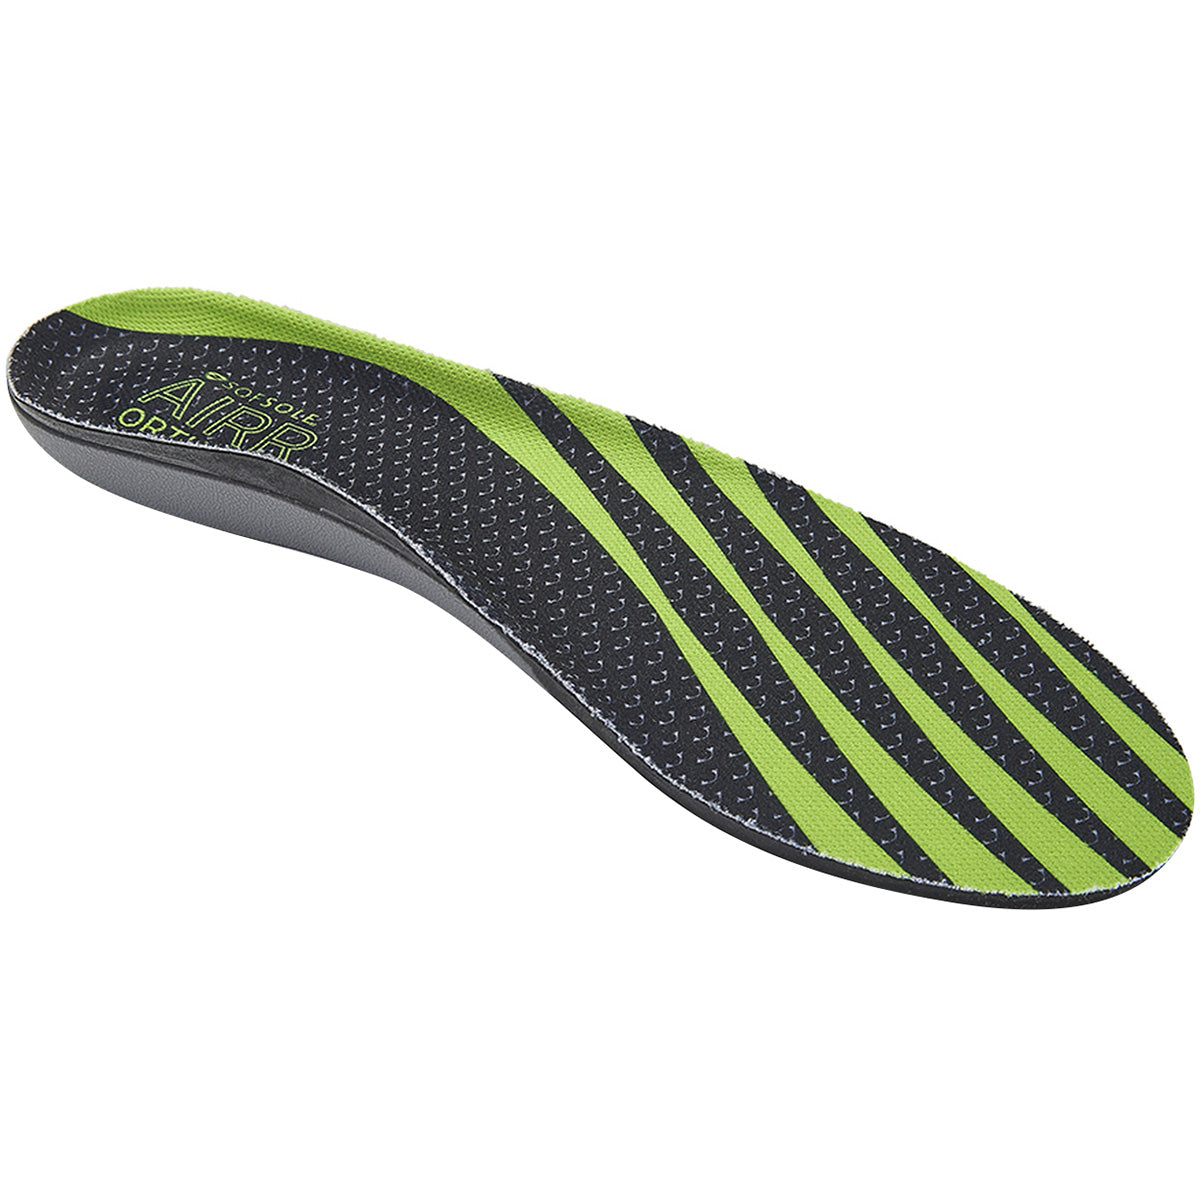 Sof Sole Airr Orthotic Full Length Shoe Insoles SofSole